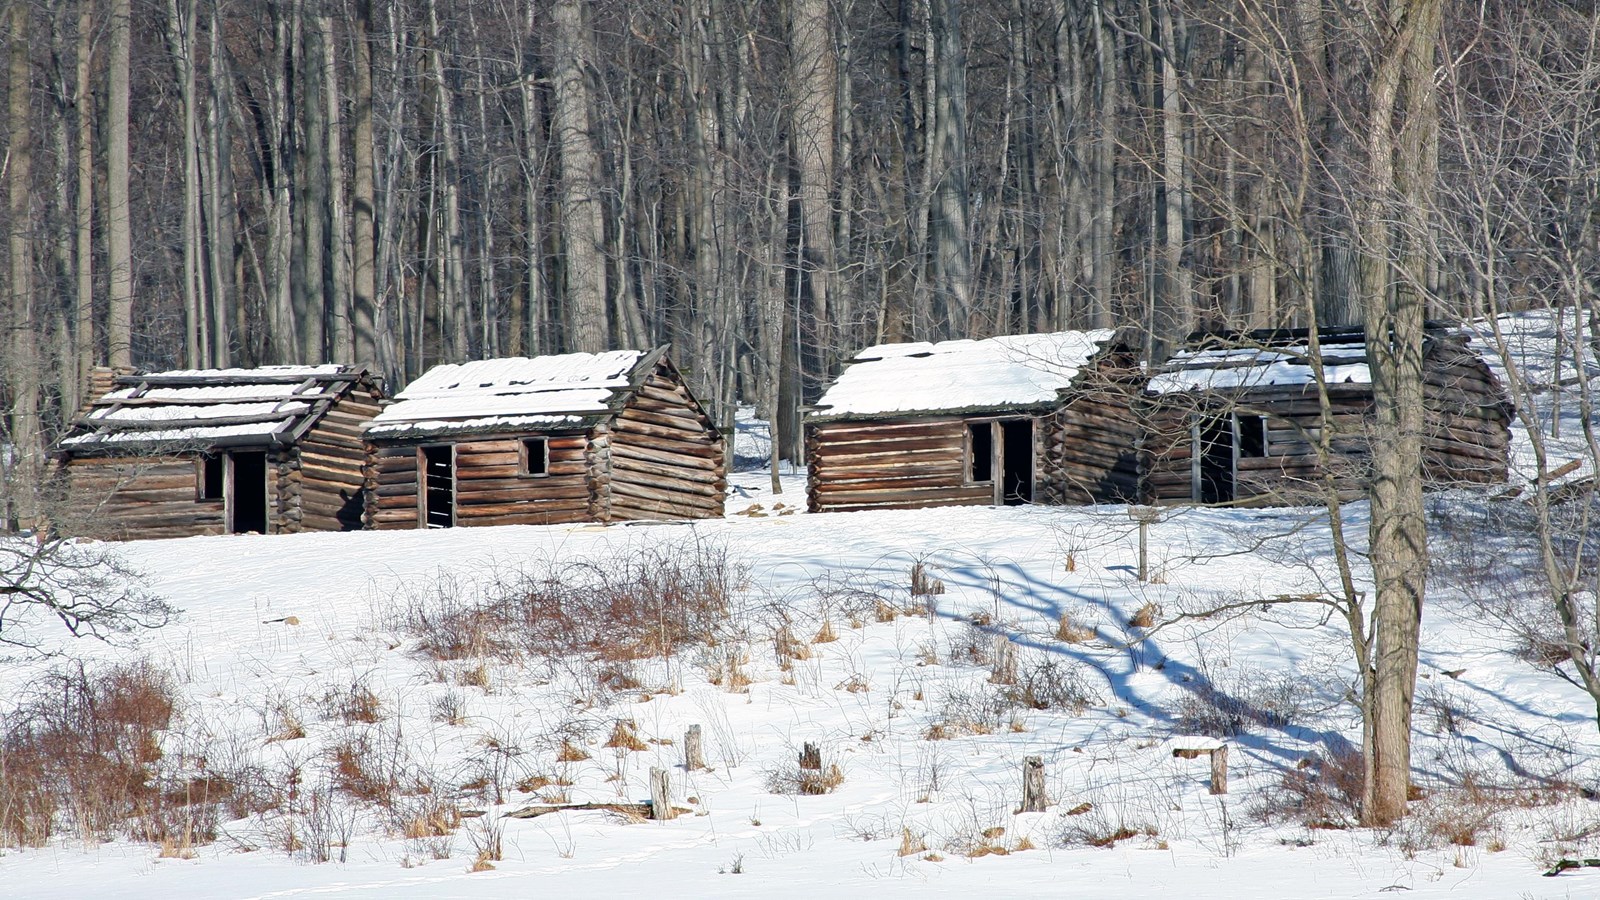 Four log huts covered in snow